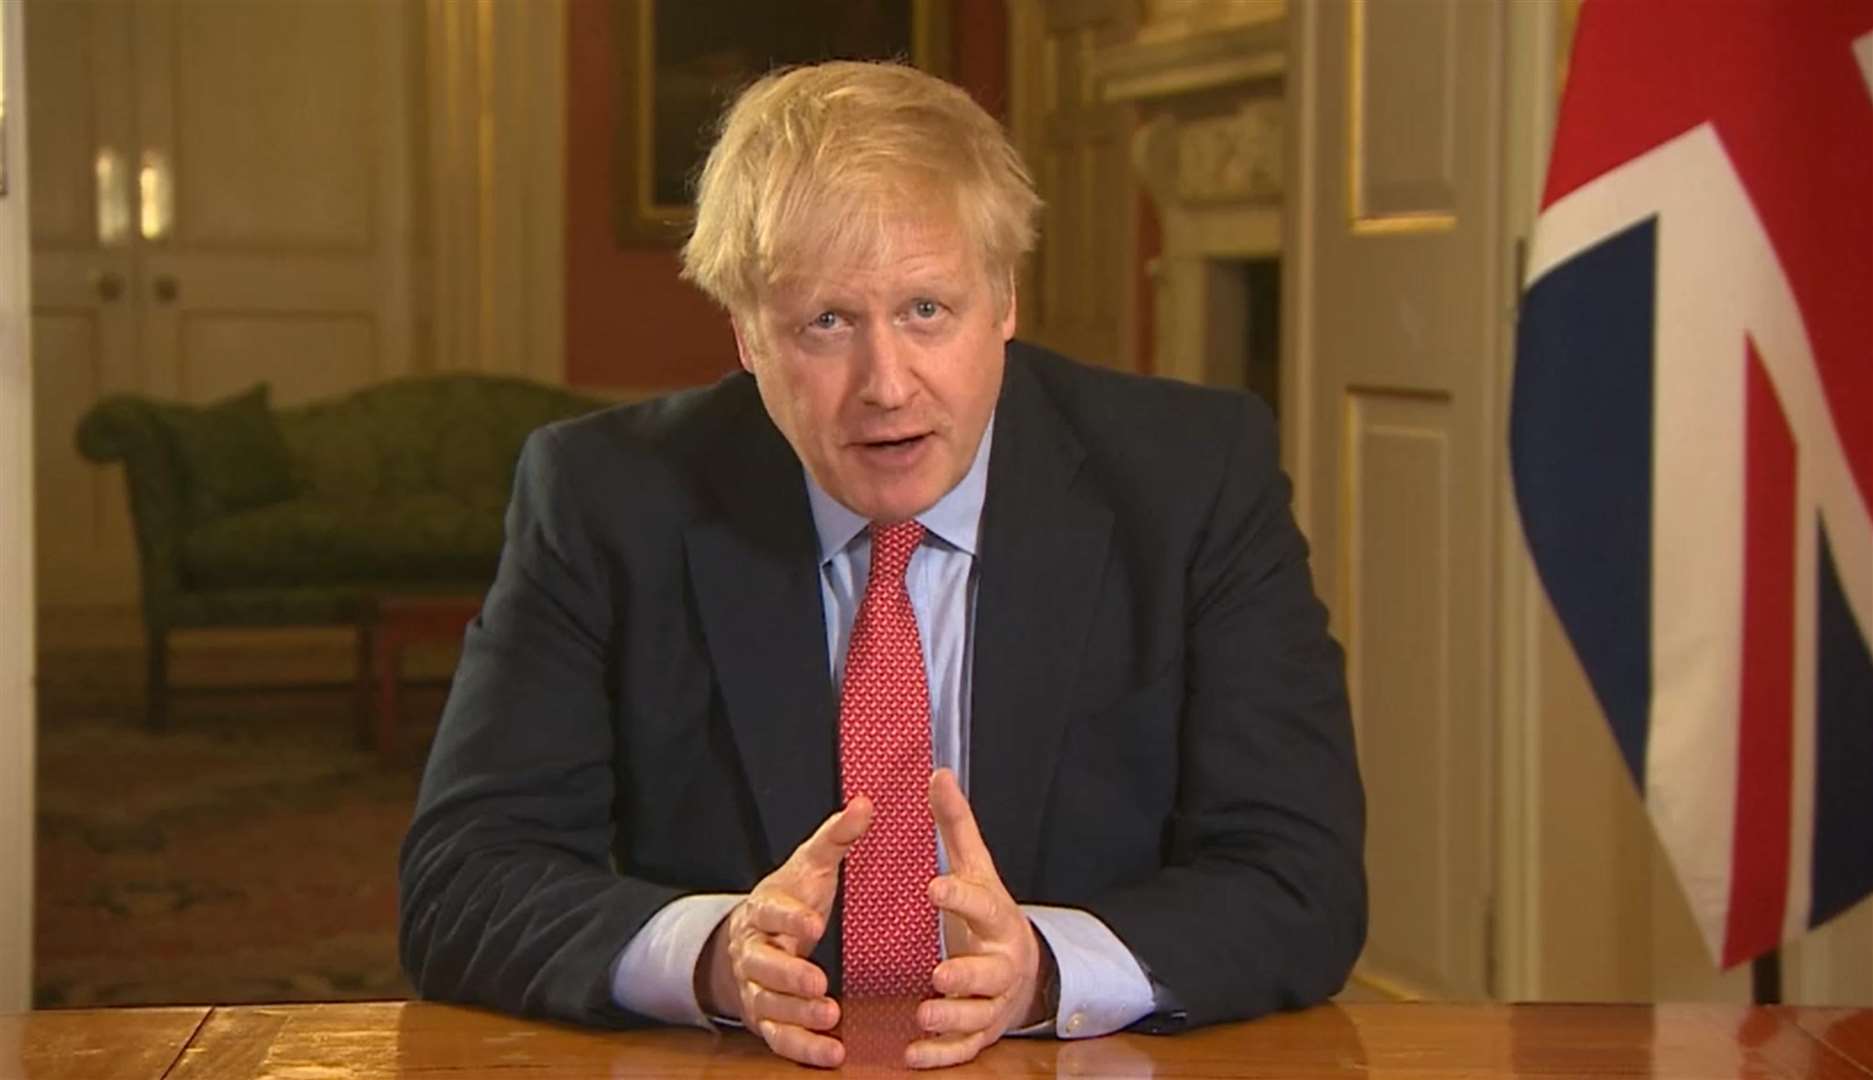 Prime Minister Boris Johnson addresses the nation from 10 Downing Street (PA)